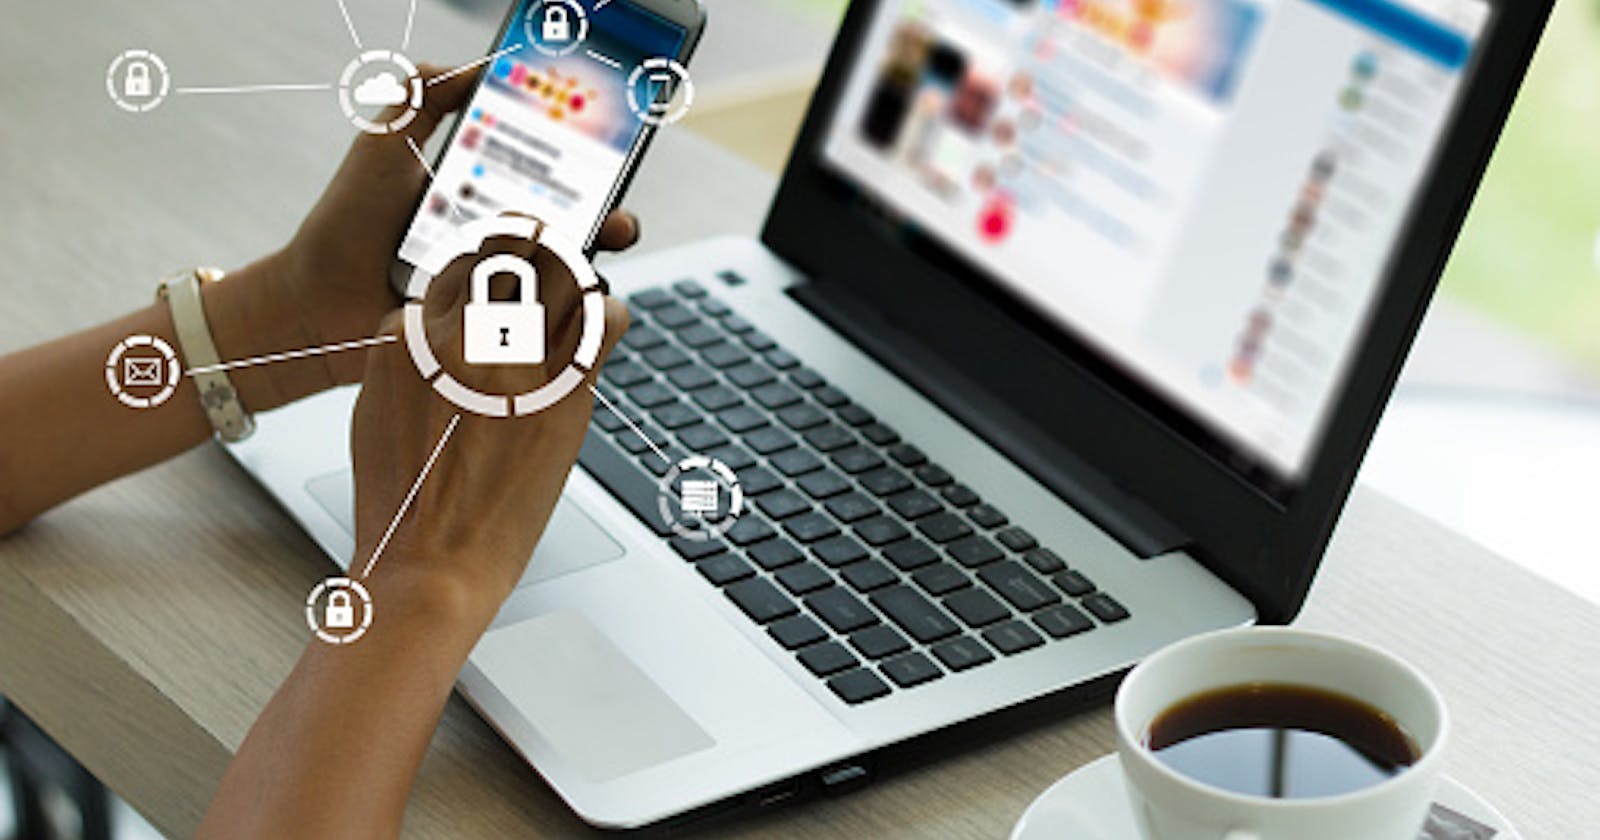 10 ways to Protect your Digital Assets